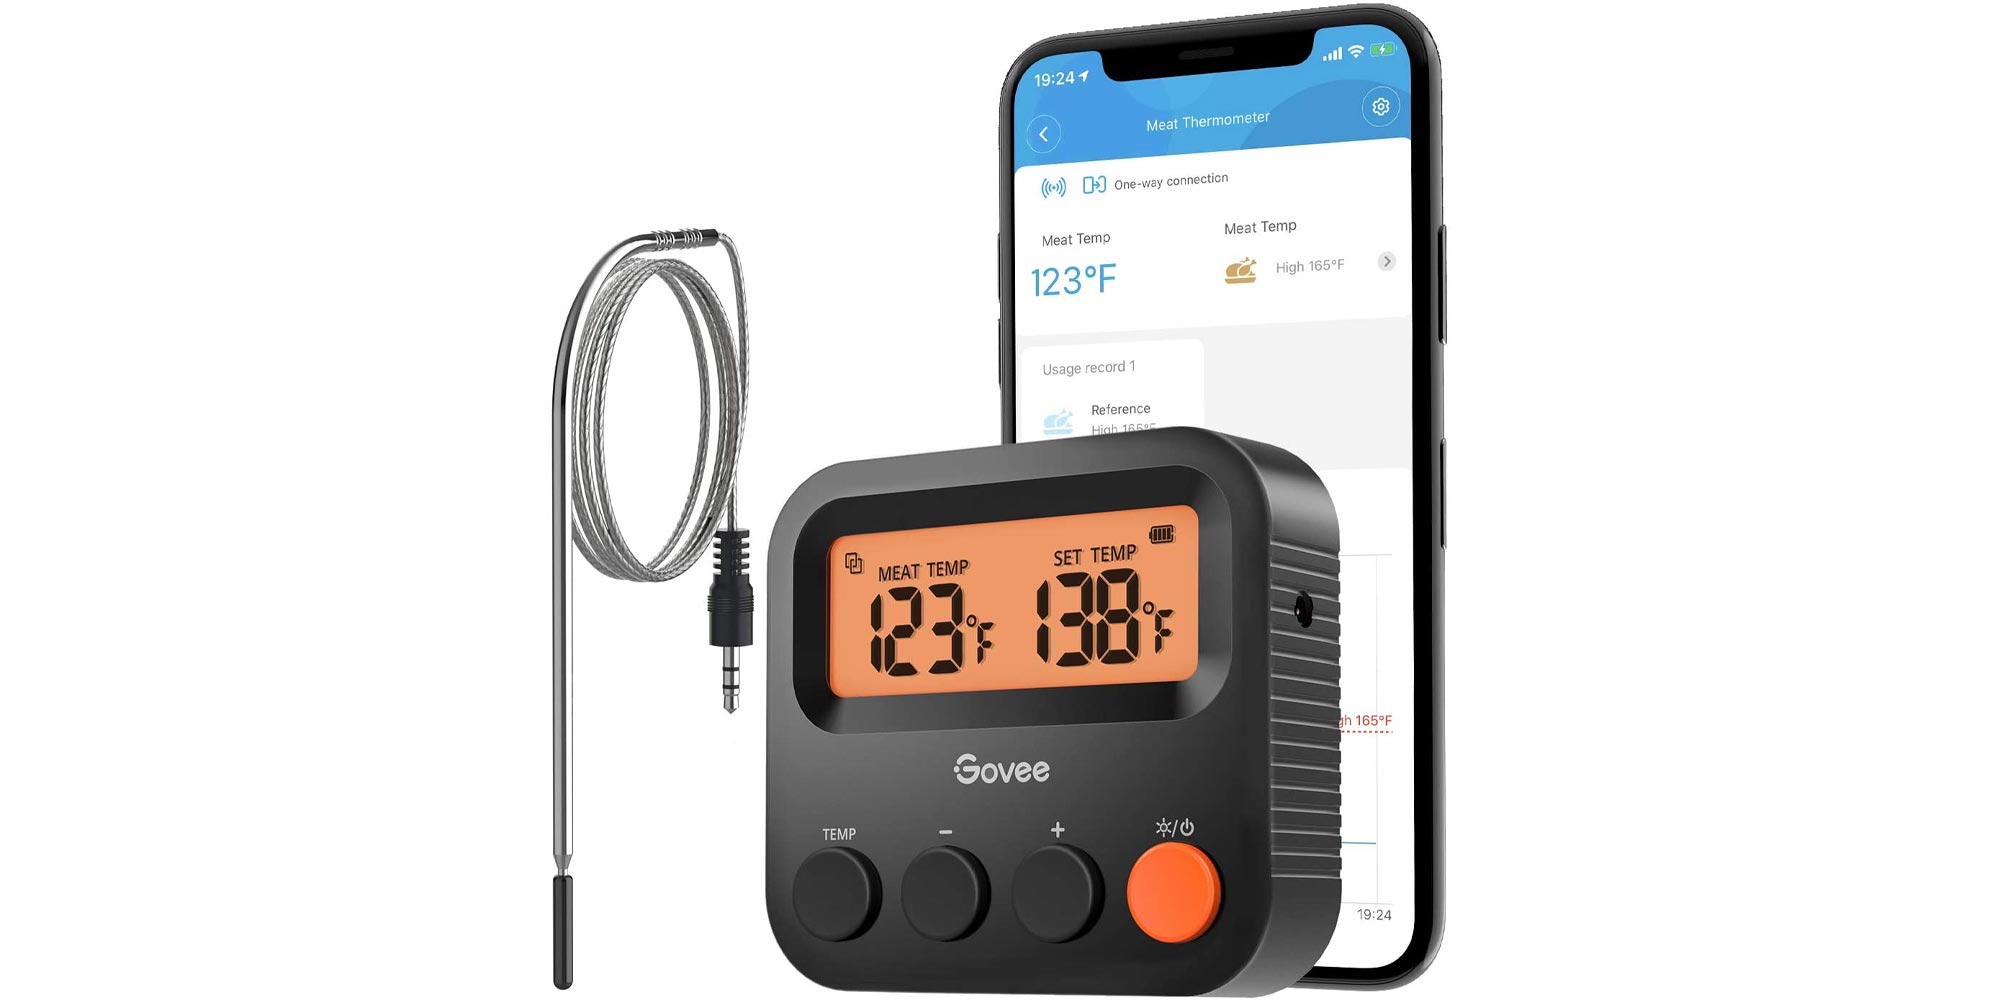 Govee's 4-Probe Bluetooth Meat Thermometer plunges to $20, more